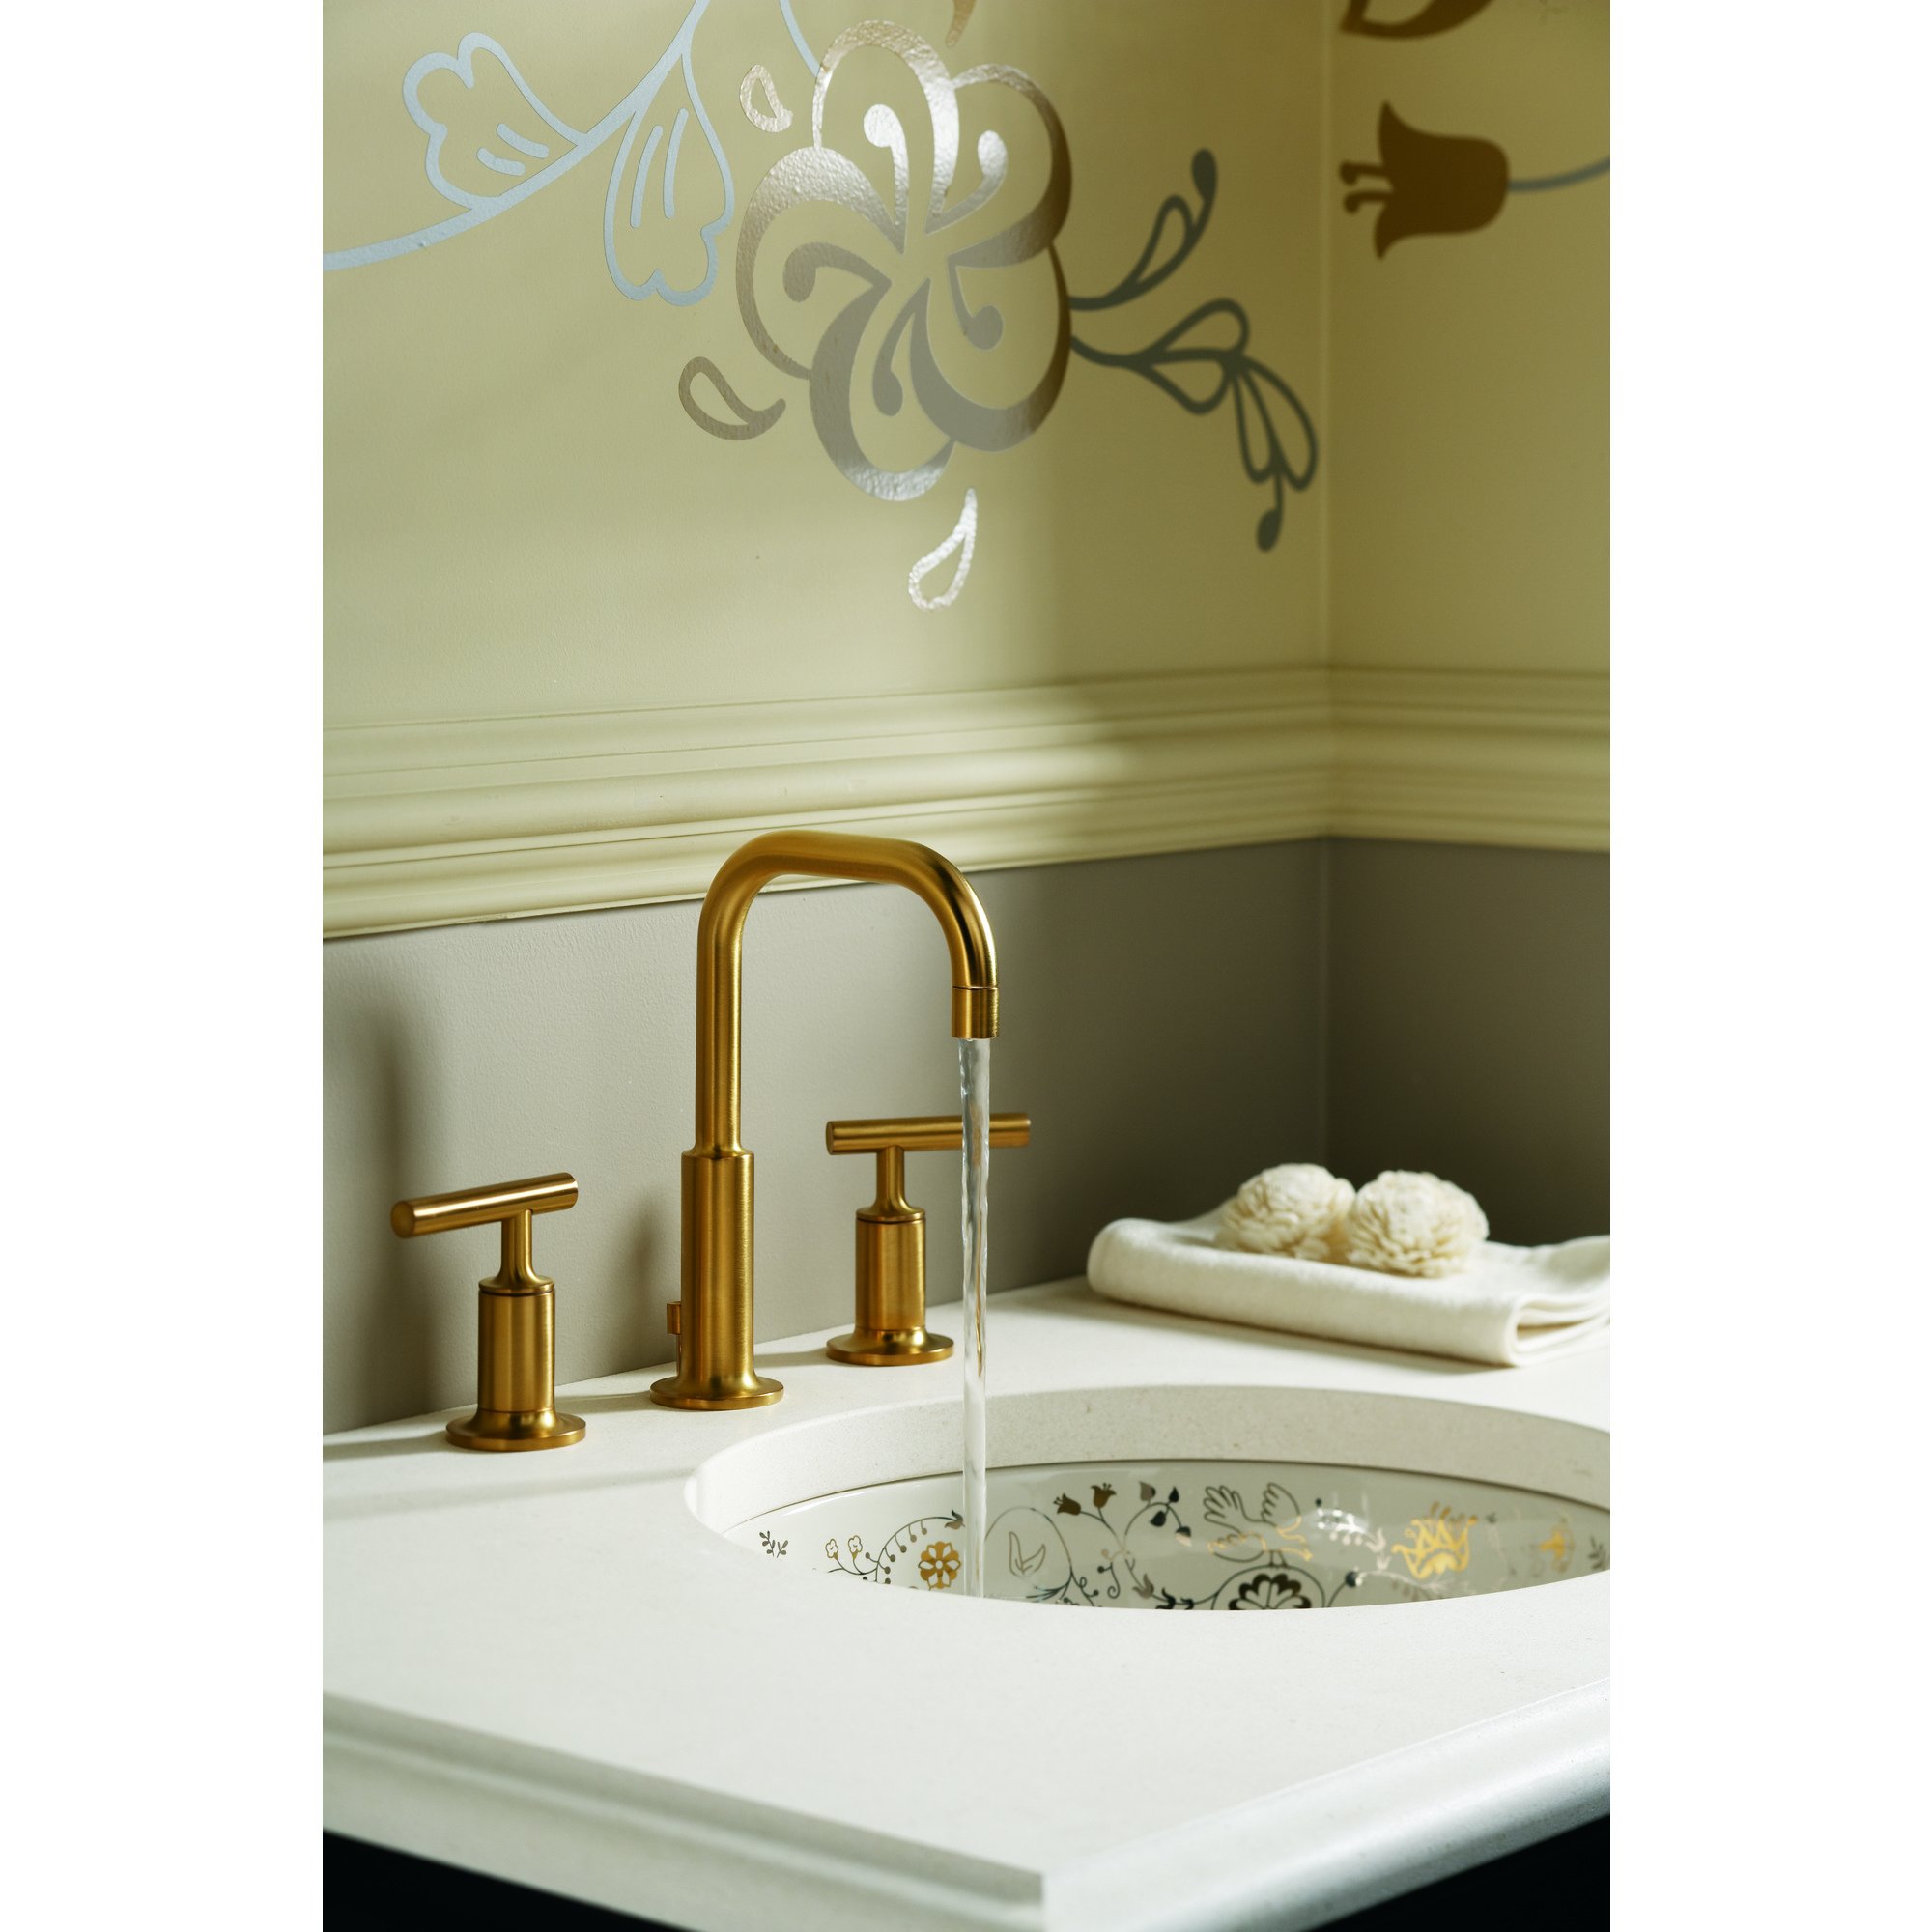 Bathroom Faucet by KOHLER, Bathroom Sink Faucet, Purist Collection, 2-Handle Widespread Faucet with Metal Drain, Vibrant Moderne Brushed Gold, K-14406-4-BGD